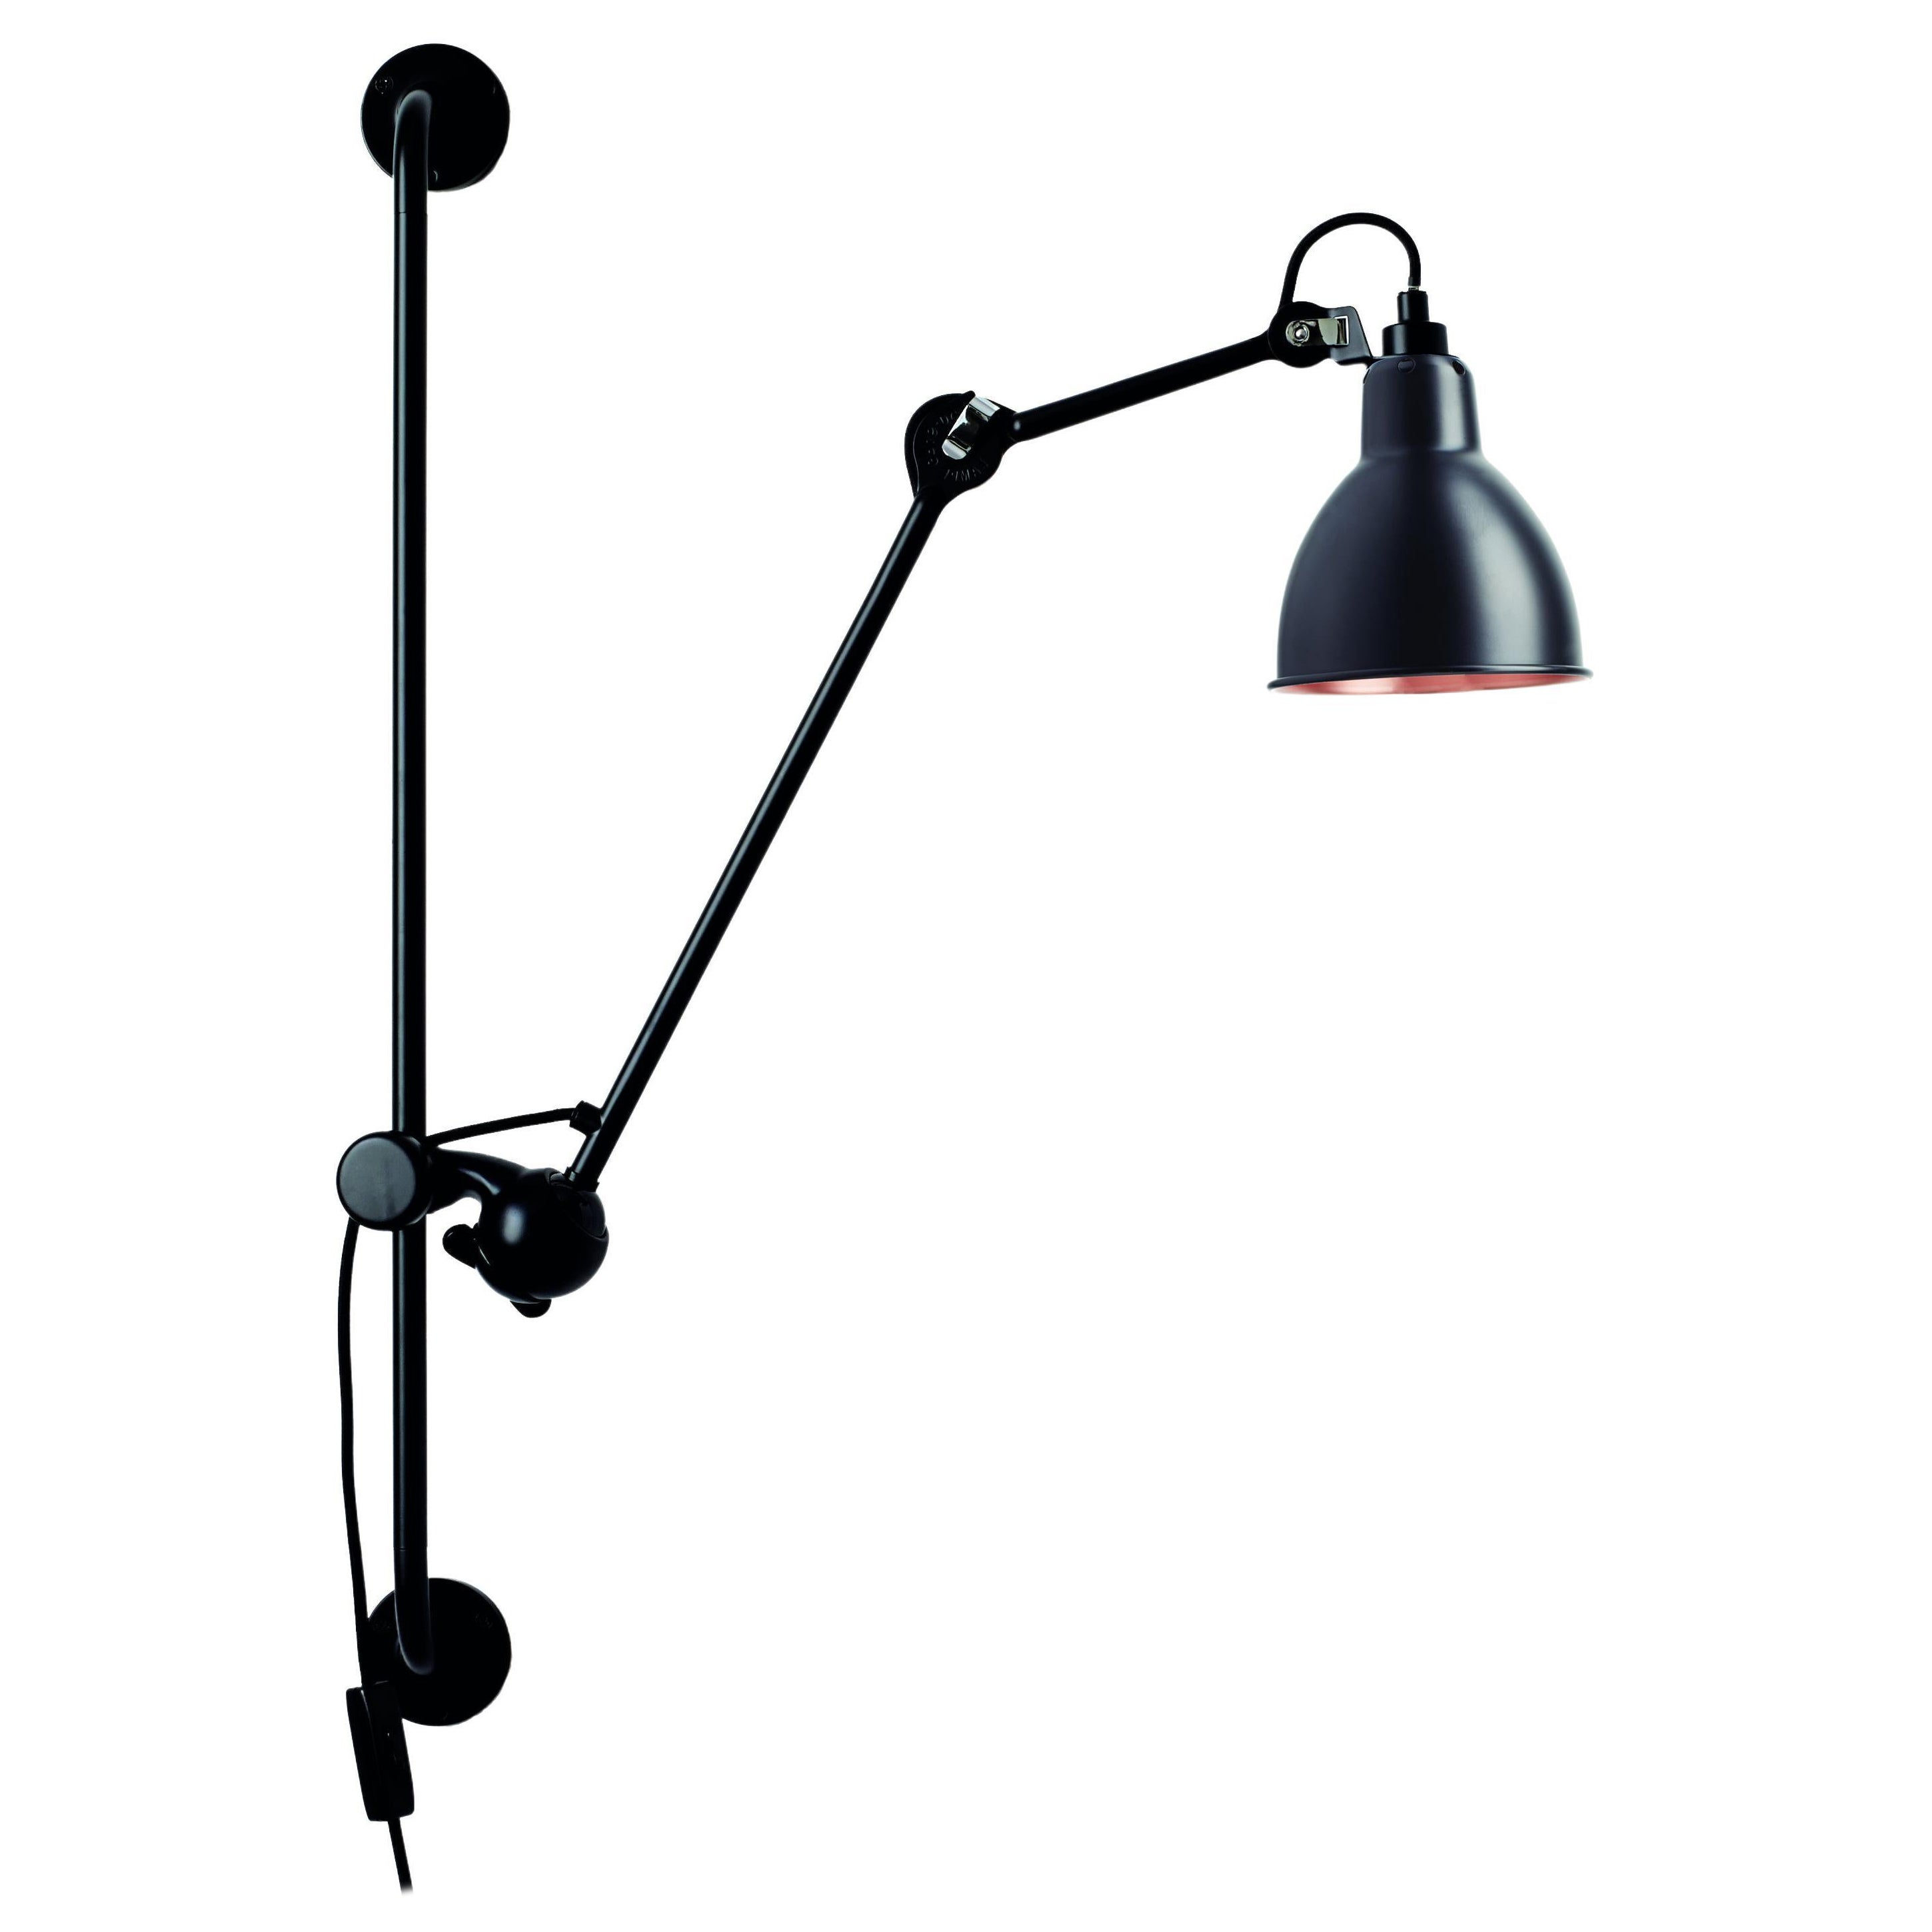 Black and Copper Lampe Gras N° 210 Wall Lamp by Bernard-Albin Gras For Sale